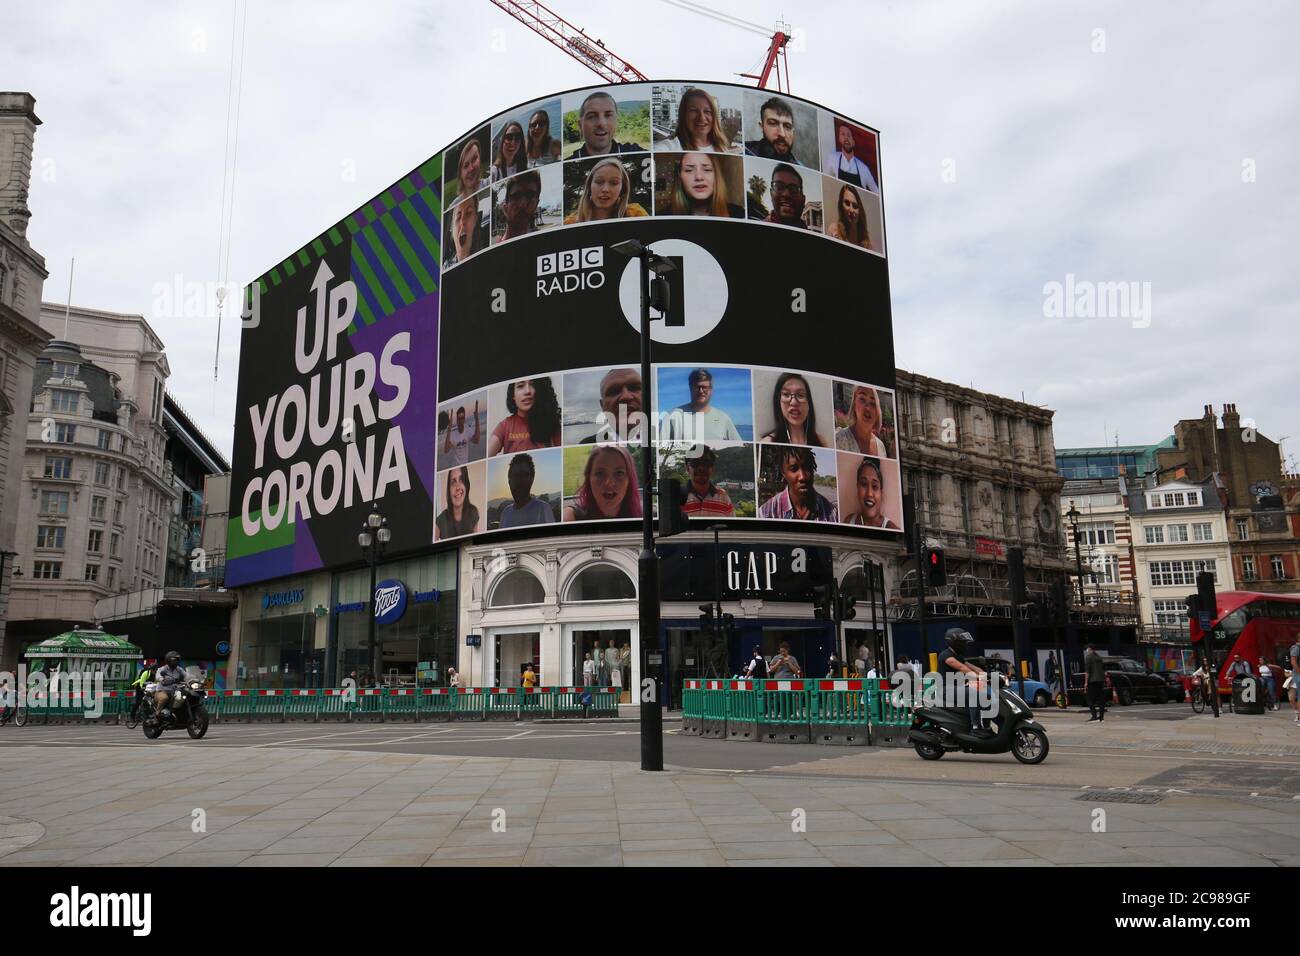 Radio 1 'Up Yours Corona' campaign is displayed on the Piccadilly Lights screen. The 10 minute long display features one person from every country in the world. Stock Photo